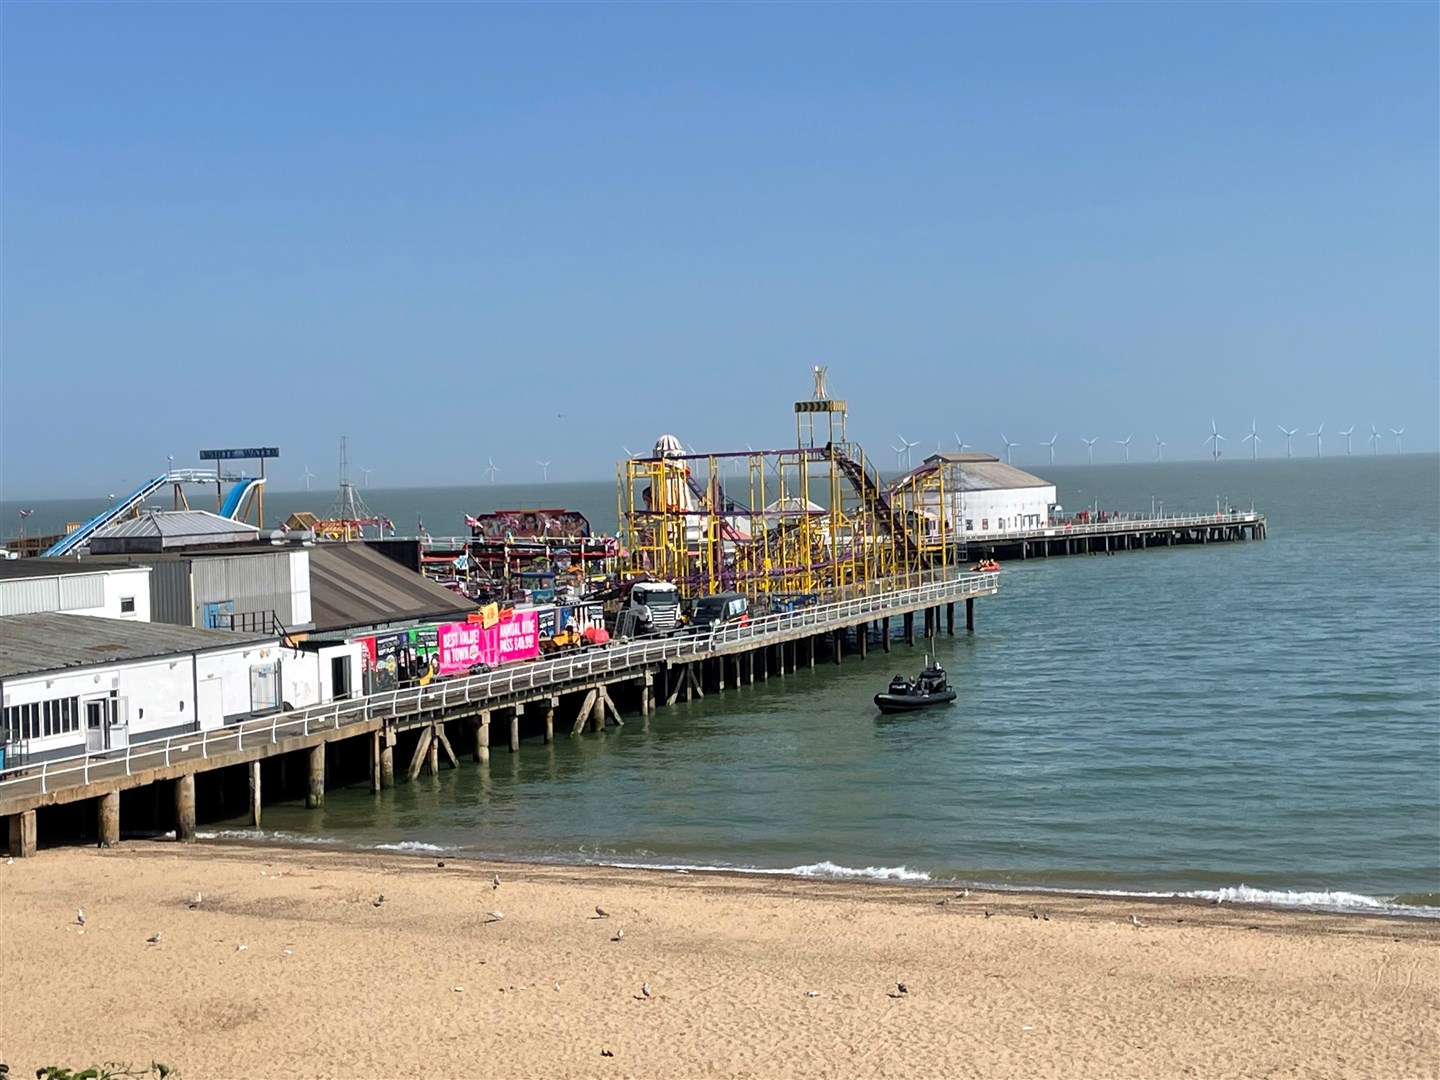 A spokesman for Clacton Pier said the current appeared to have ‘dragged’ a group under the structure (Sam Russell/PA)